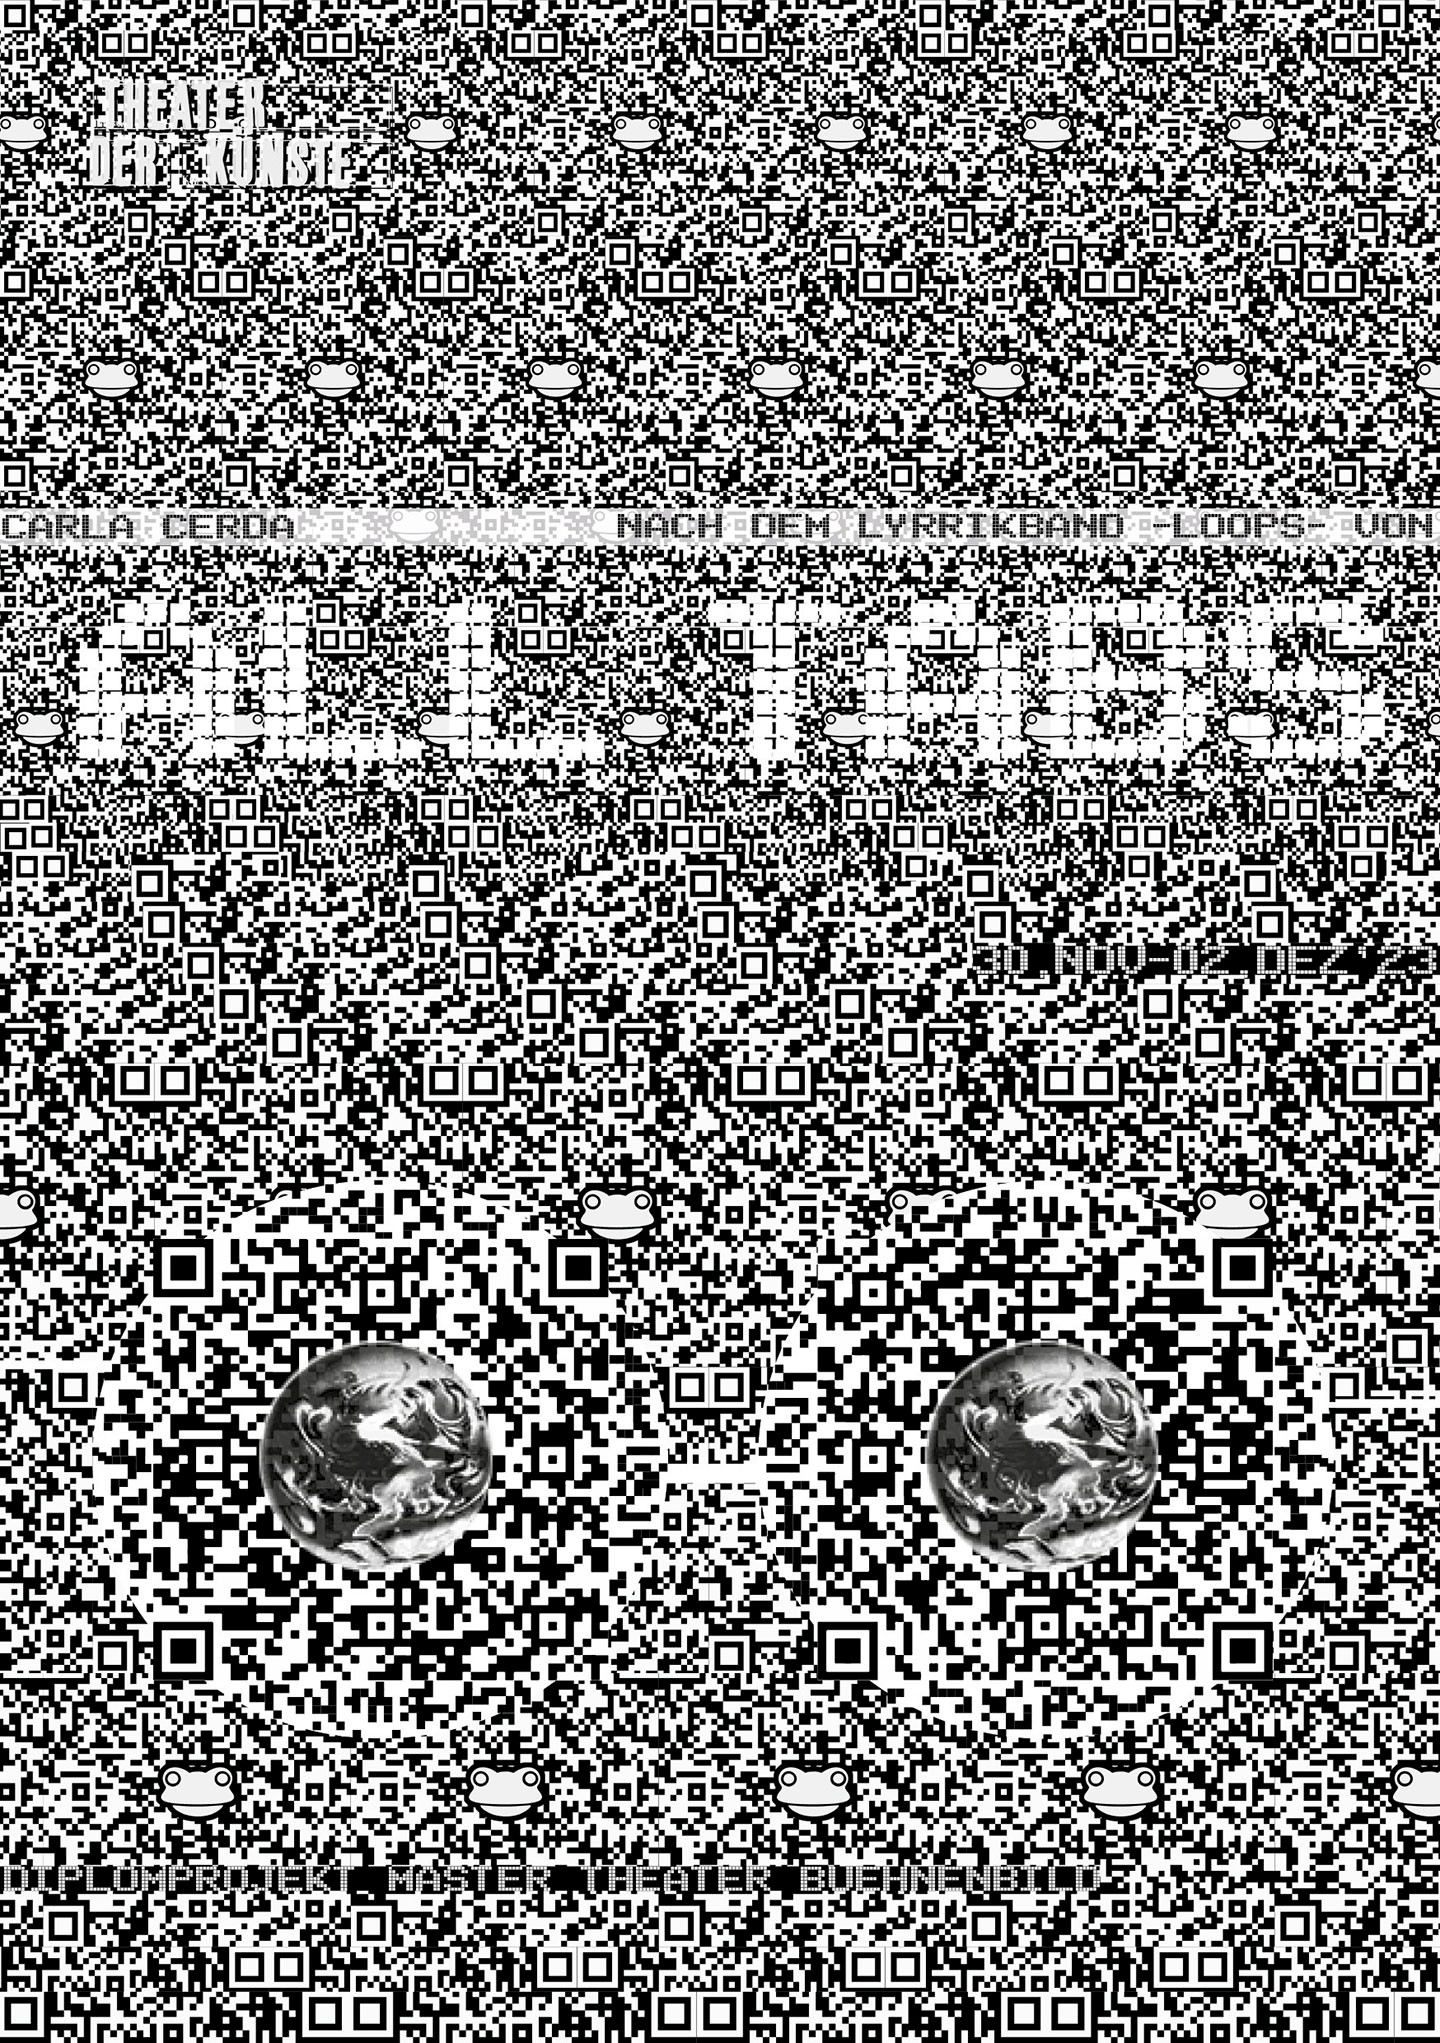 ALL TABS